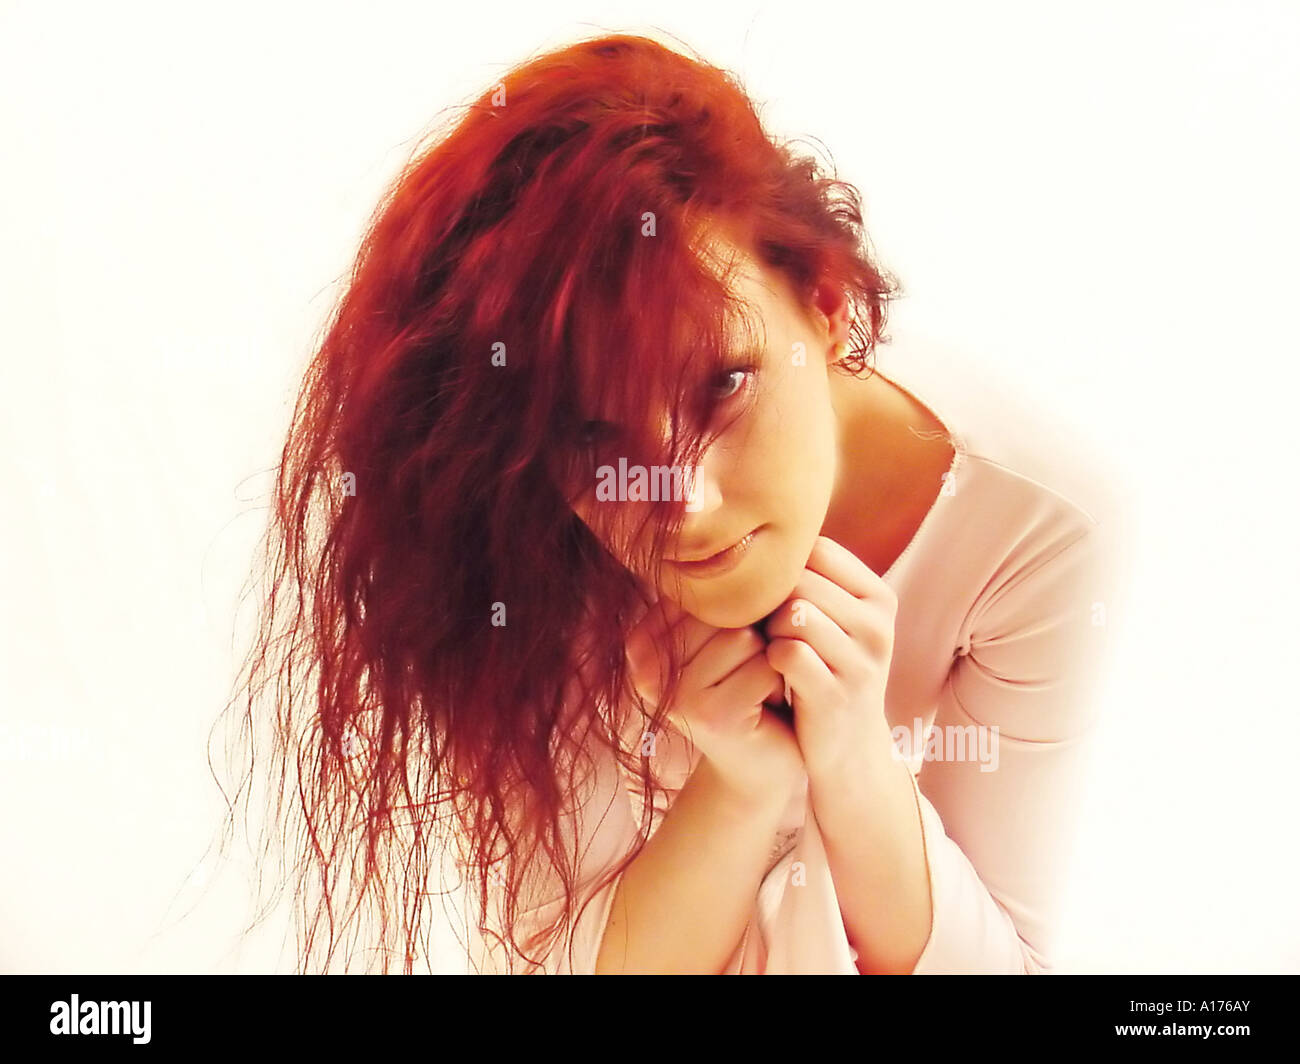 young lady with red hair Stock Photo